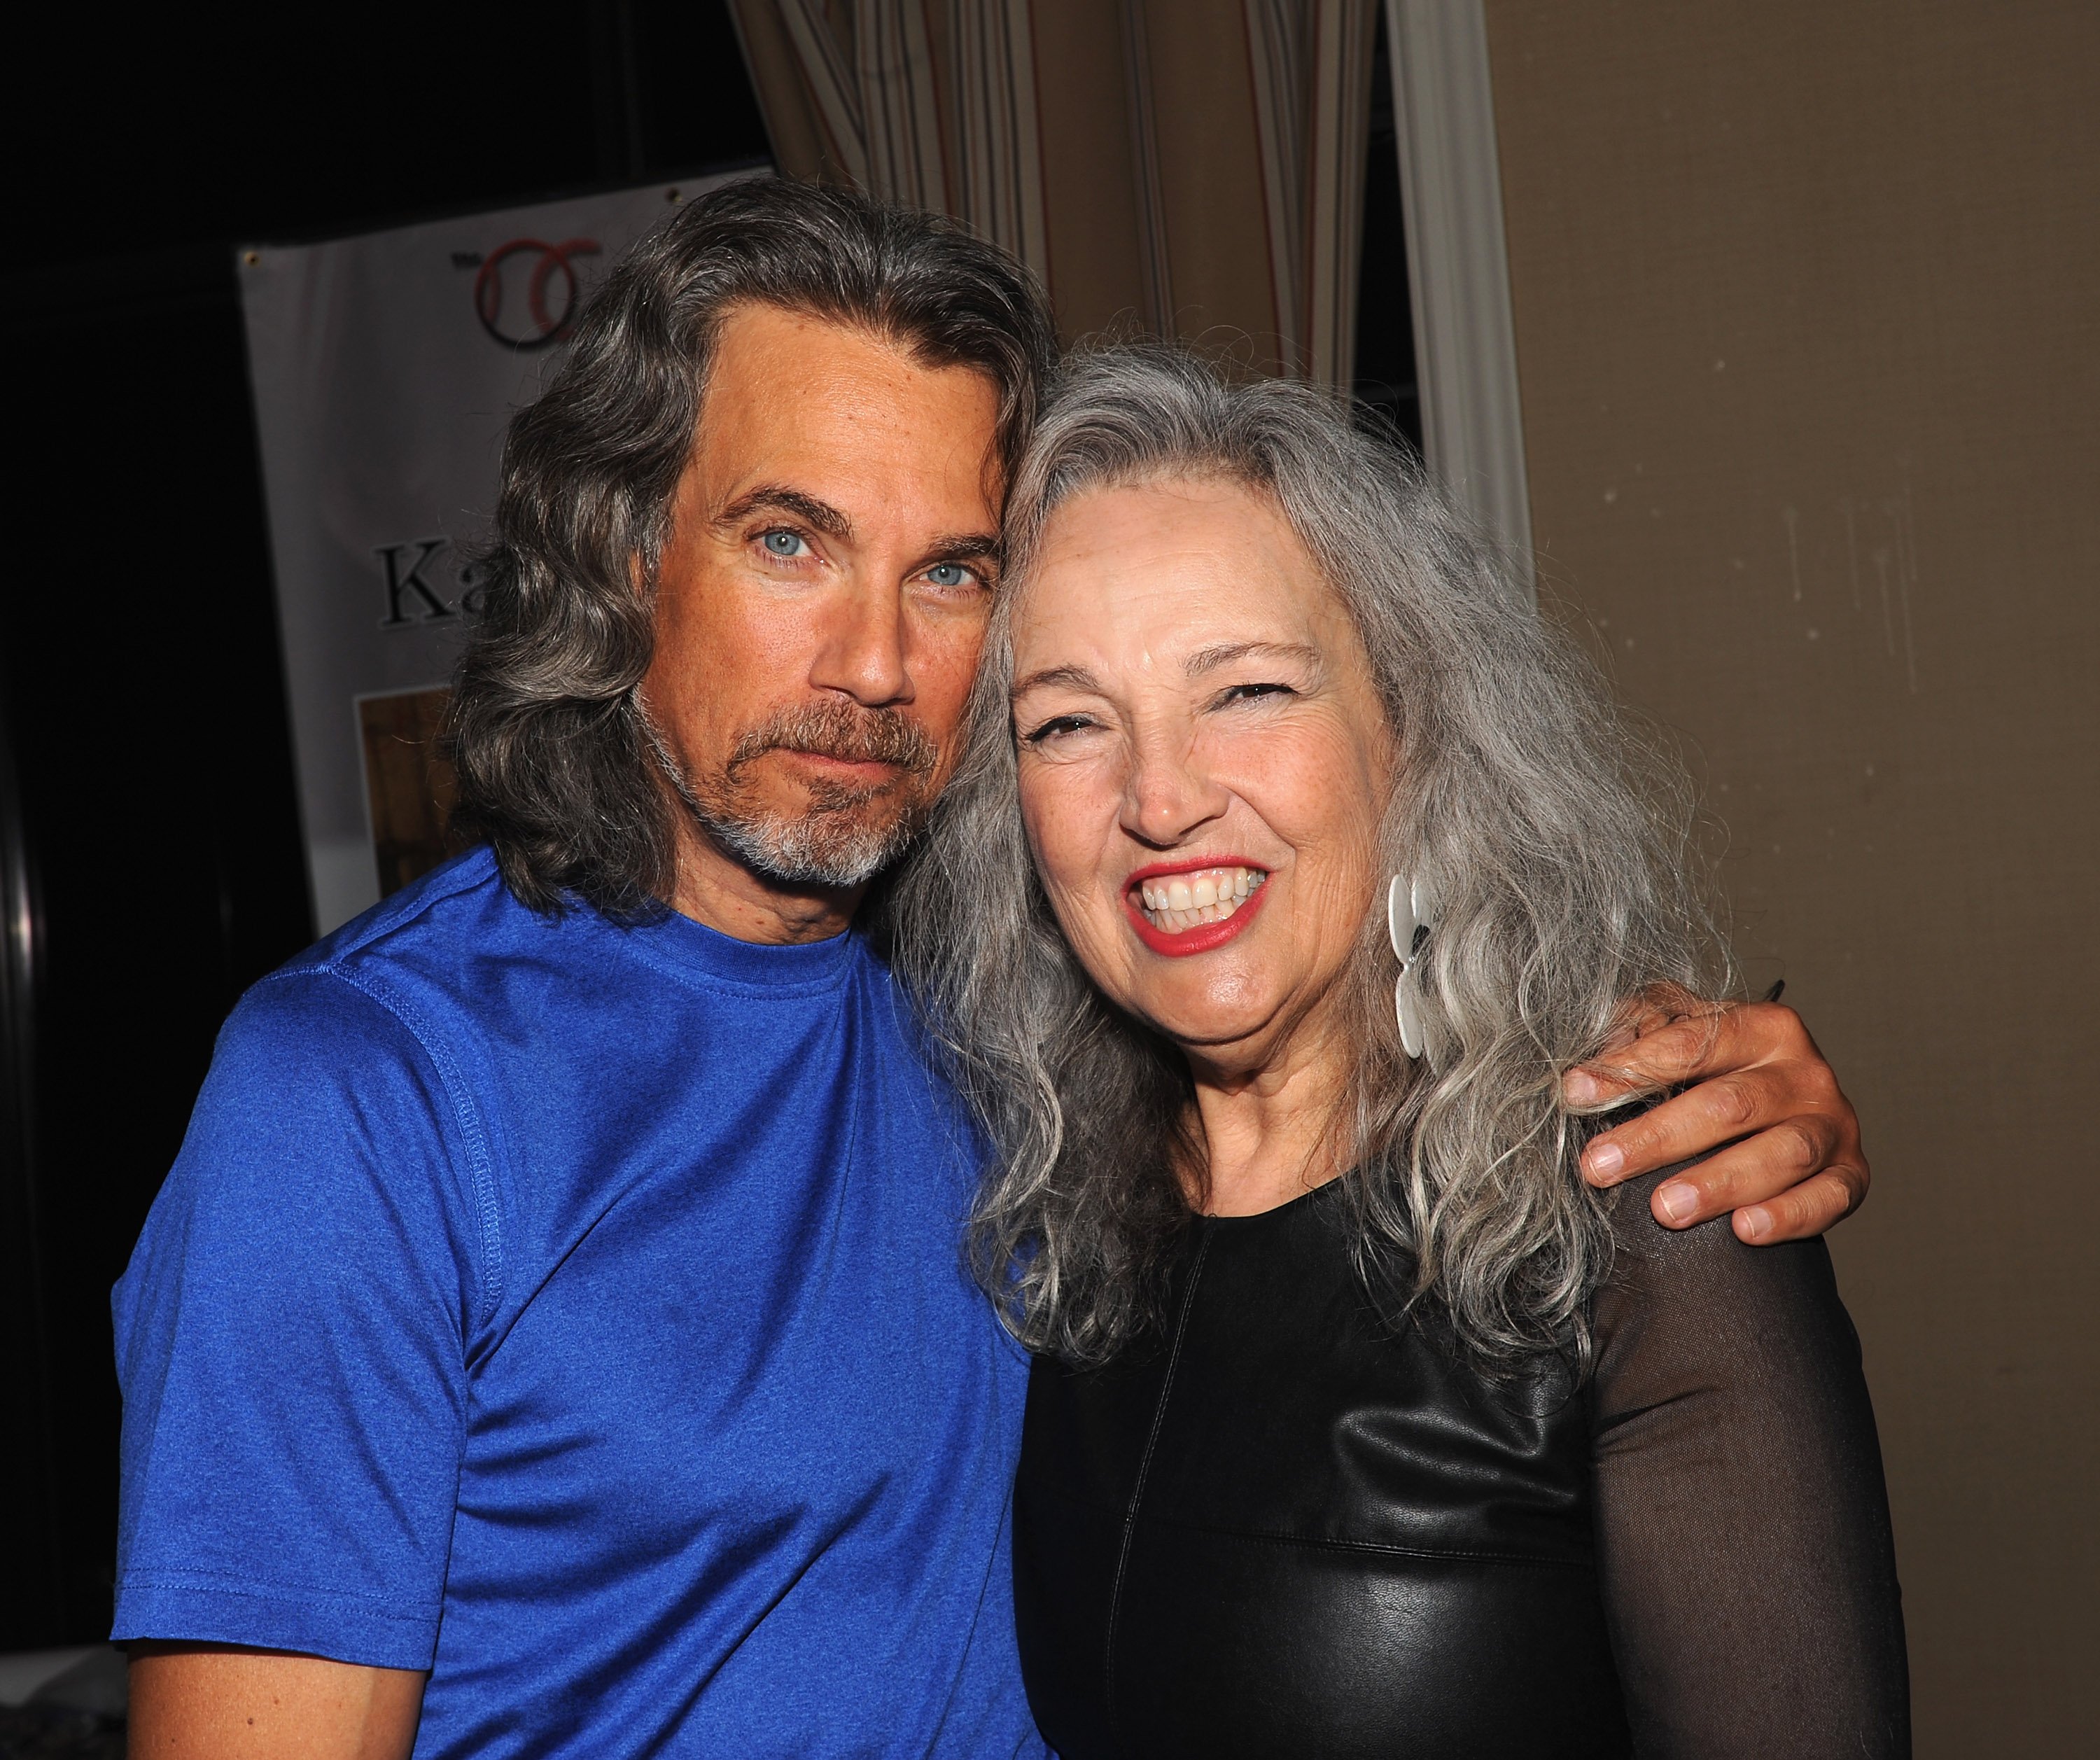 Robby Benson and Karla DeVito attends the Chiller Theatre Expo - Day 1 at Sheraton Parsippany Hotel on October 23, 2015 in Parsippany, New Jersey | Source: Getty Images